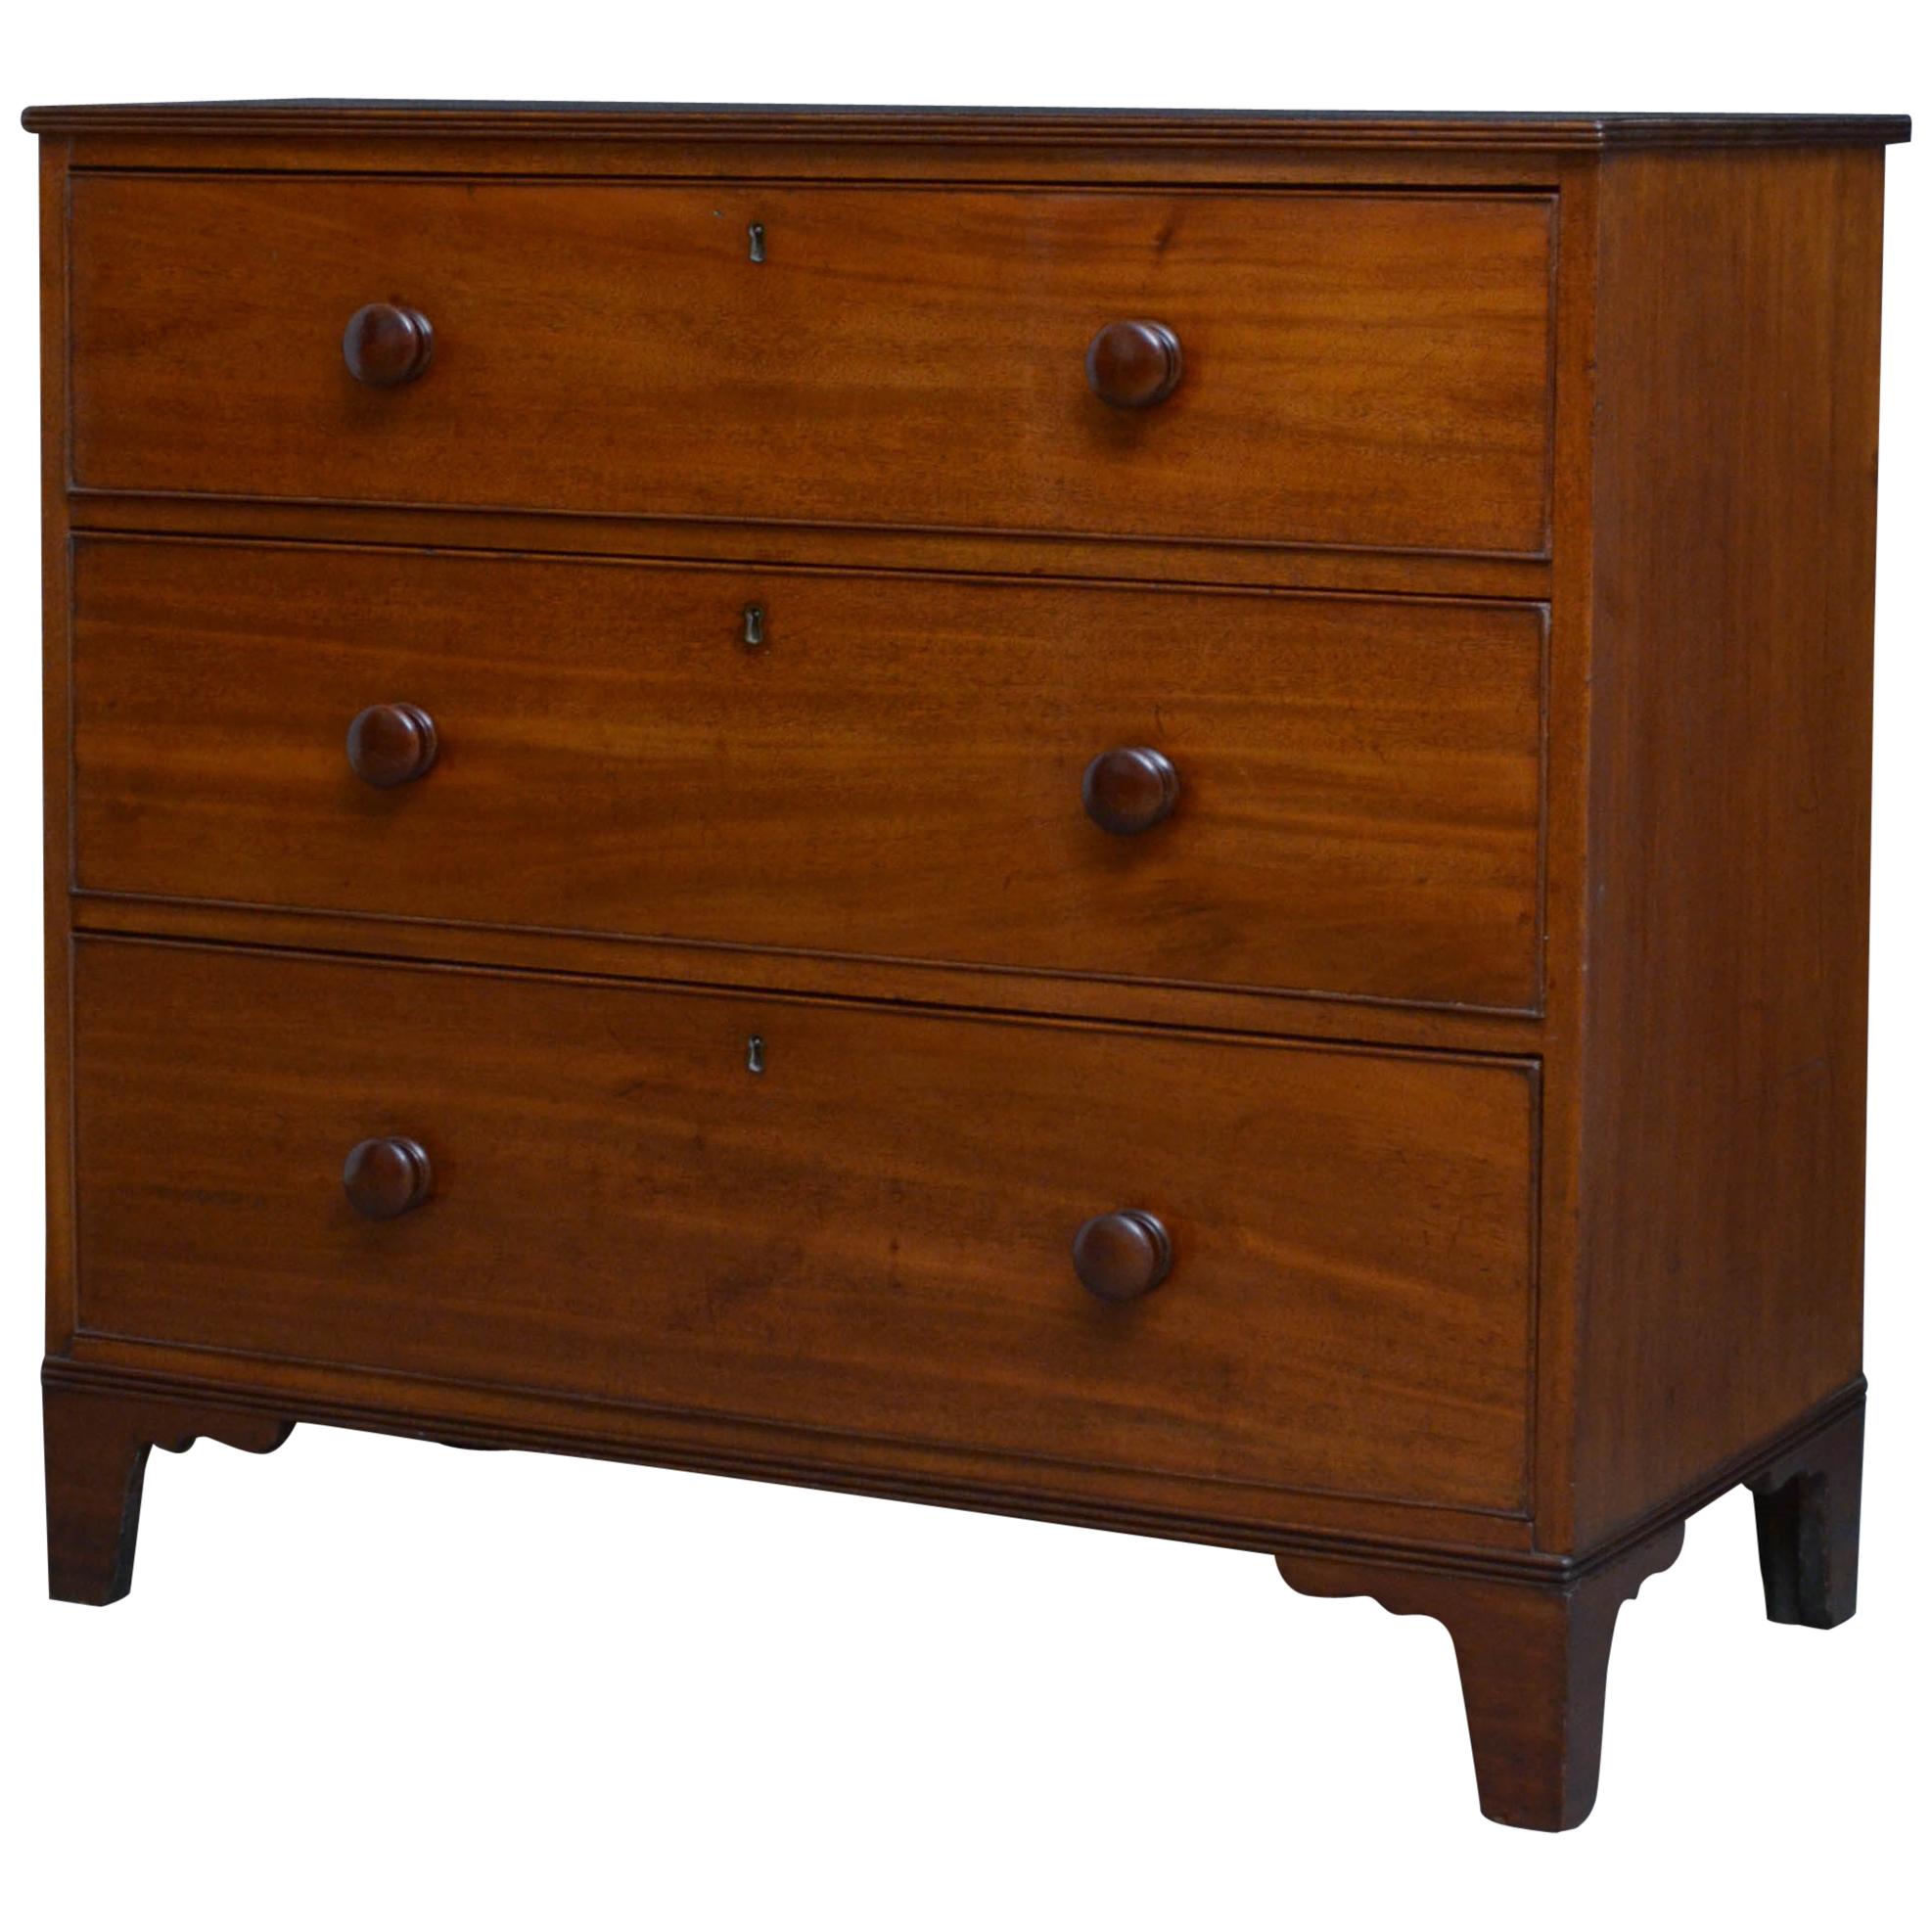 George IV Mahogany Chest of Drawers